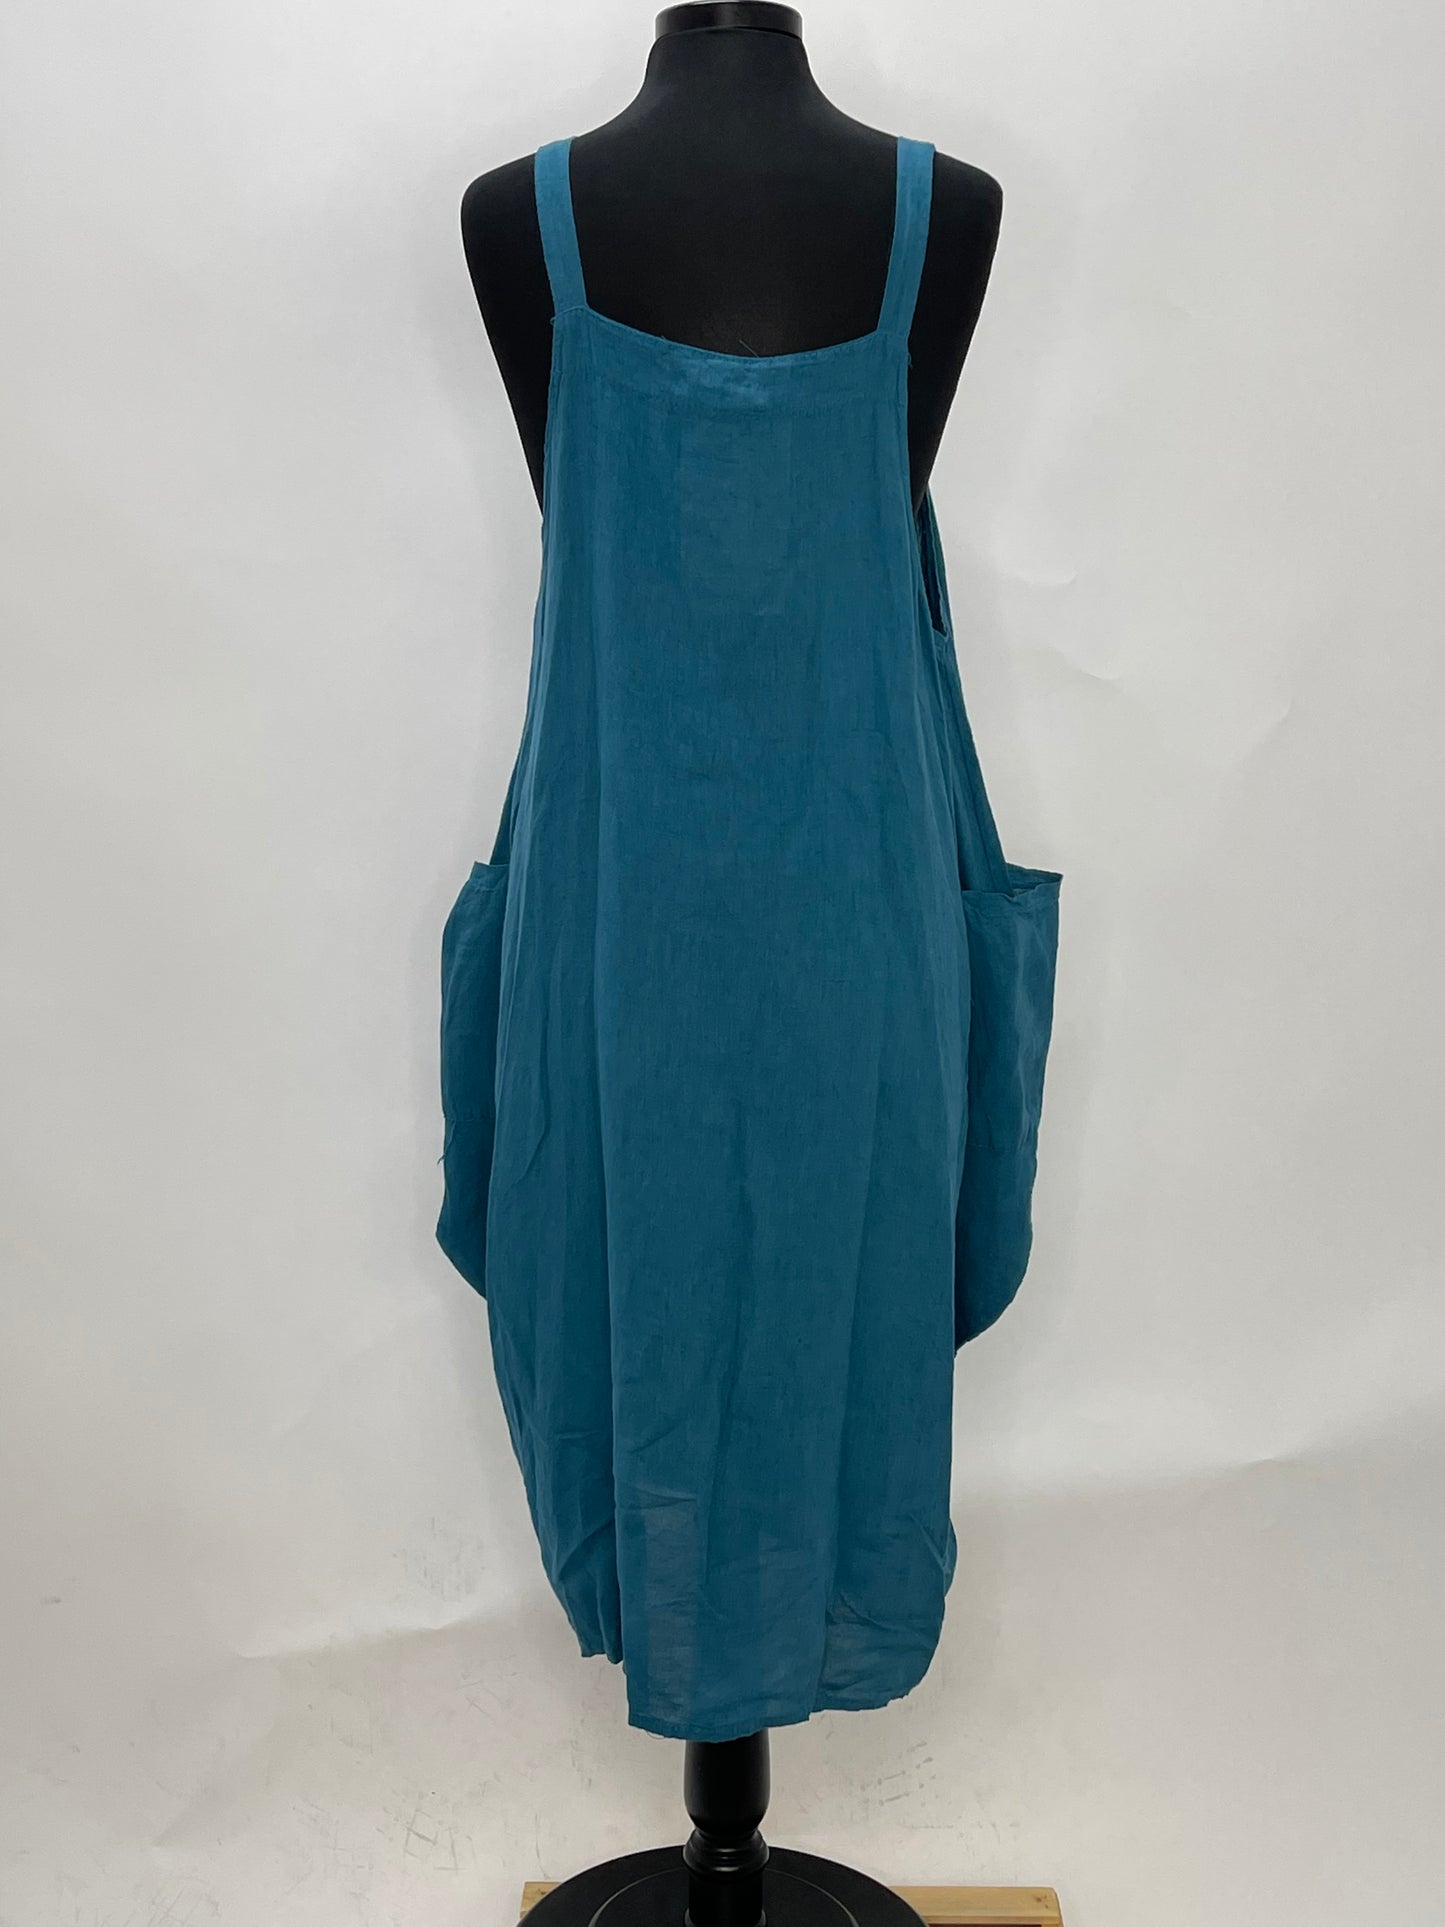 Teal Dress - One Size